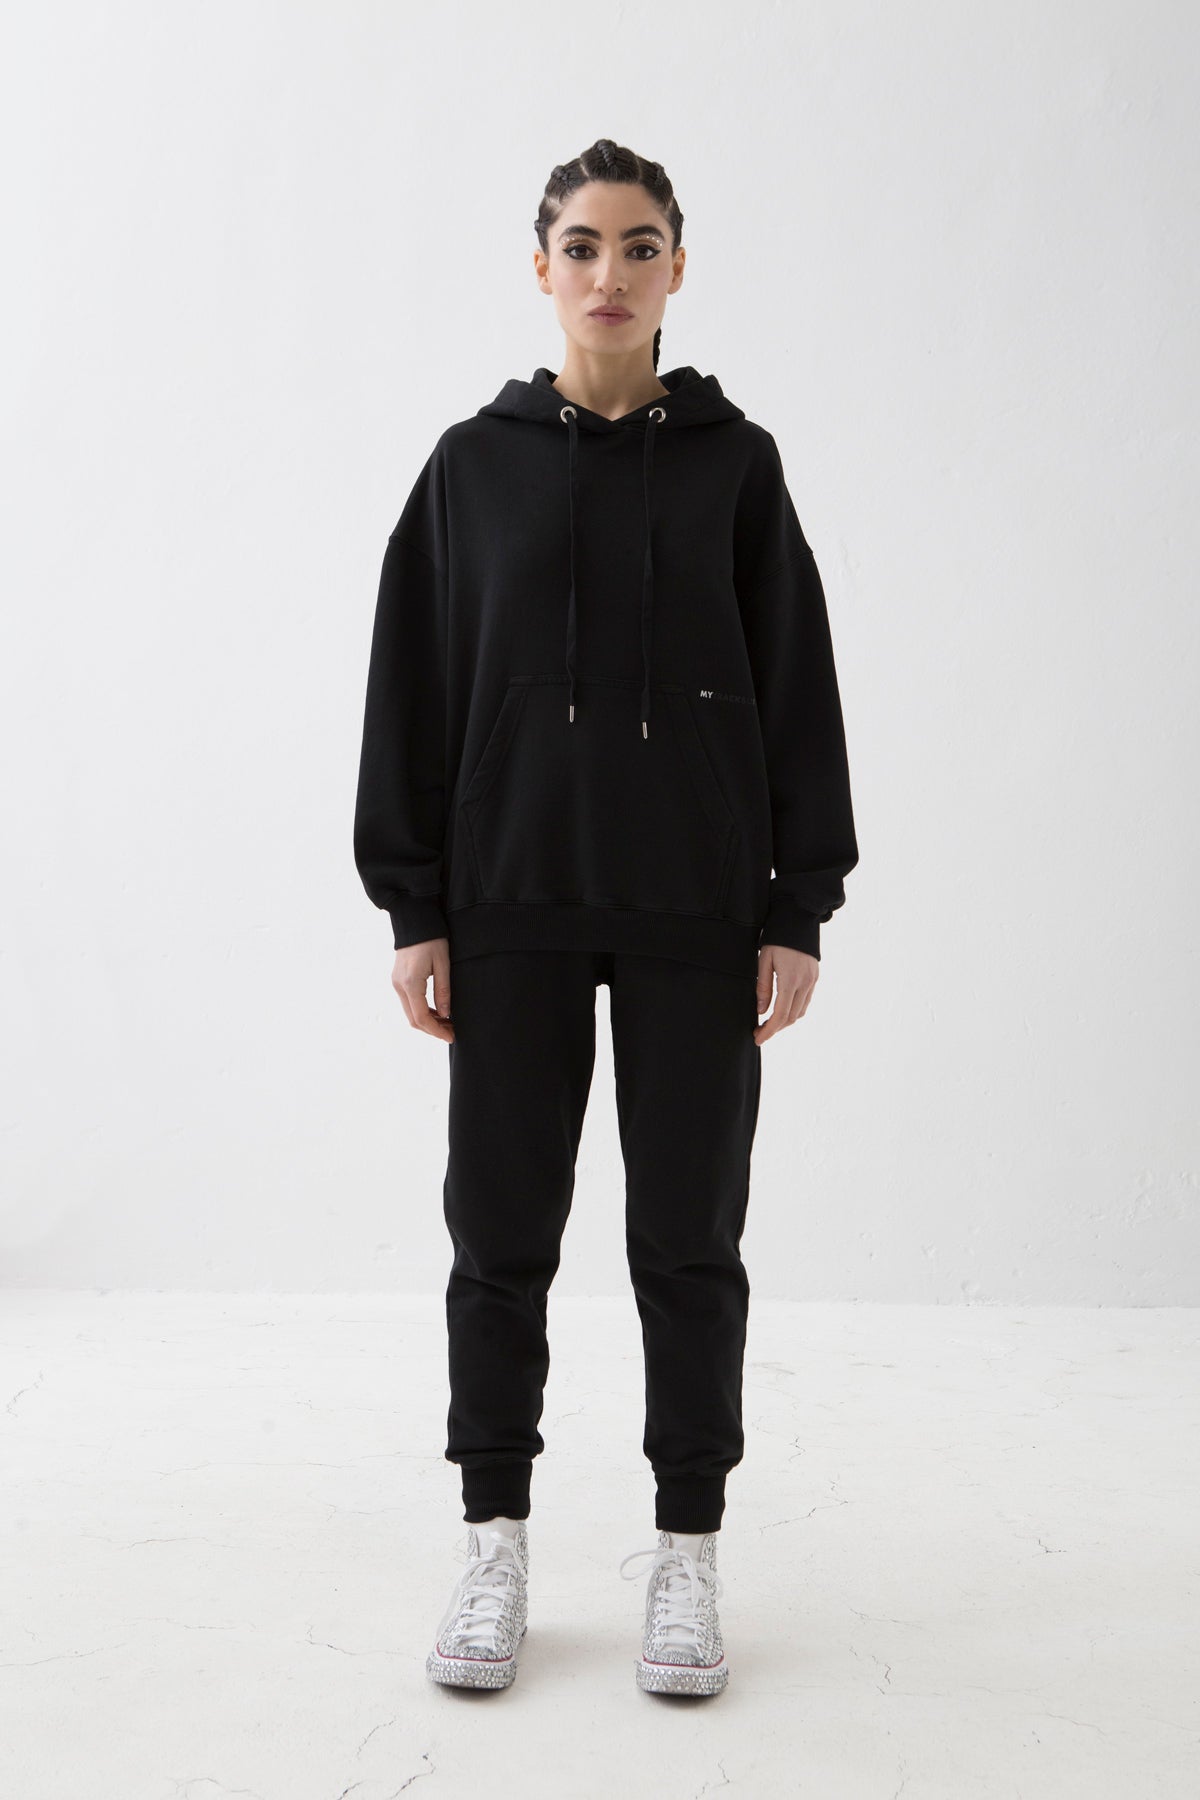 MYTRACKSUIT - HOODIE SWEATER / RIBBED BAND PANTS BLACK